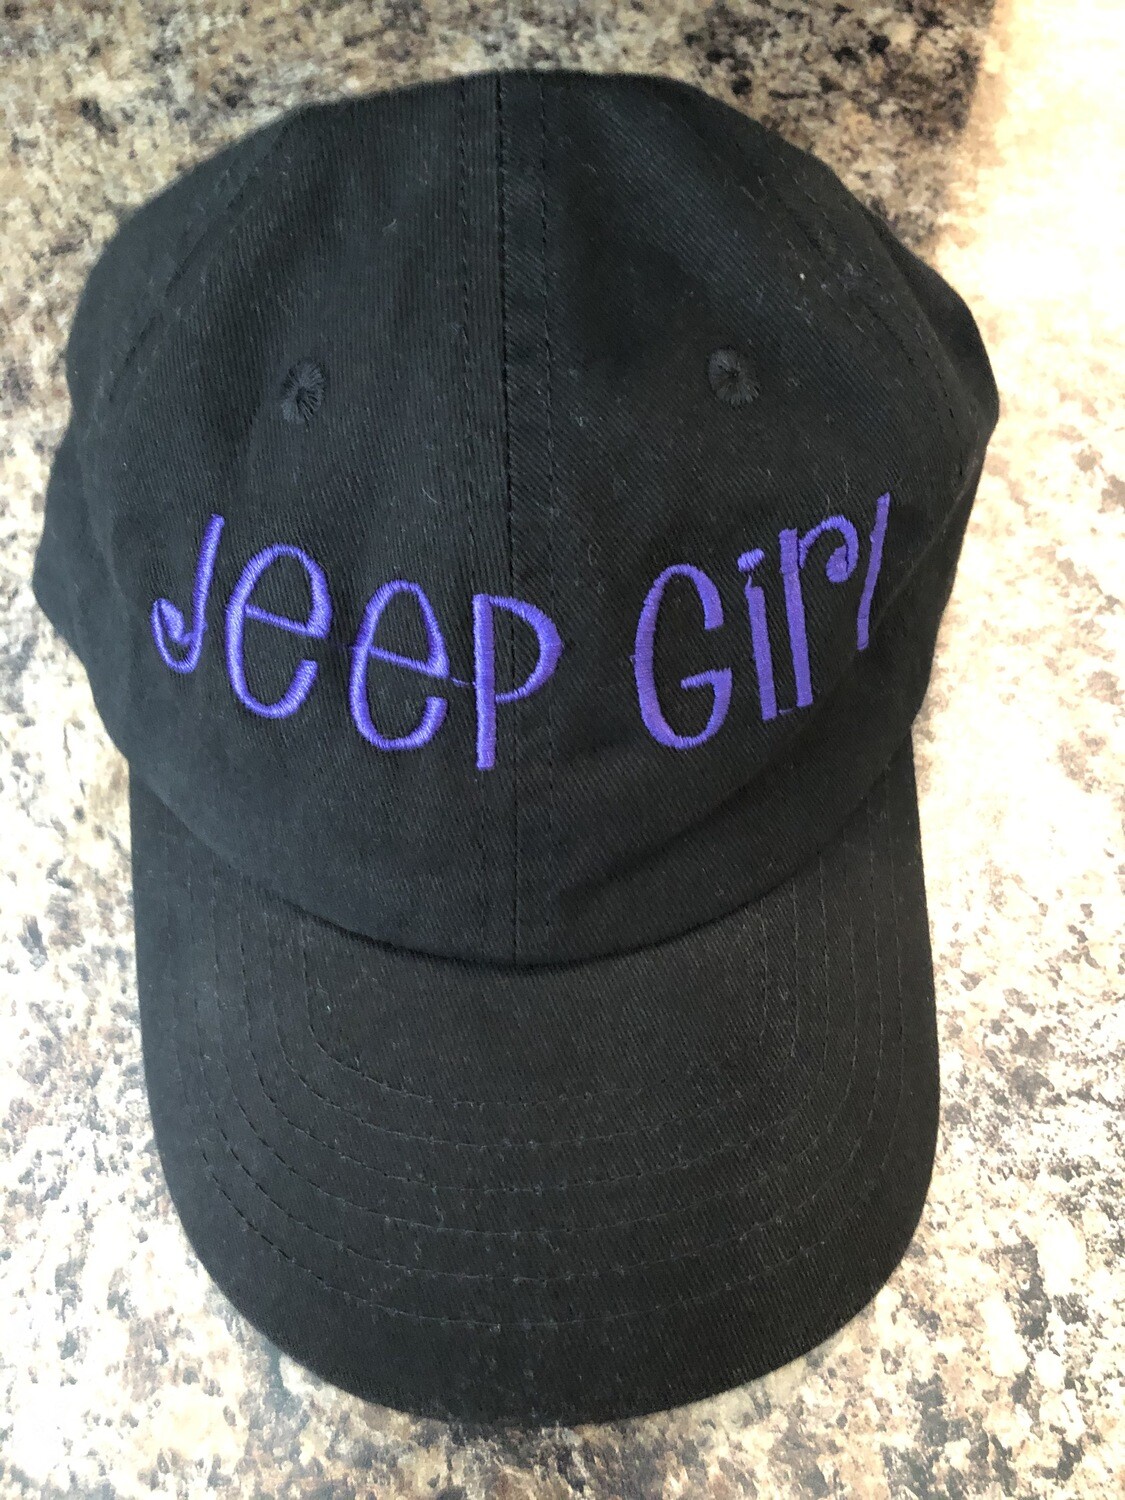 Jeep girl hat